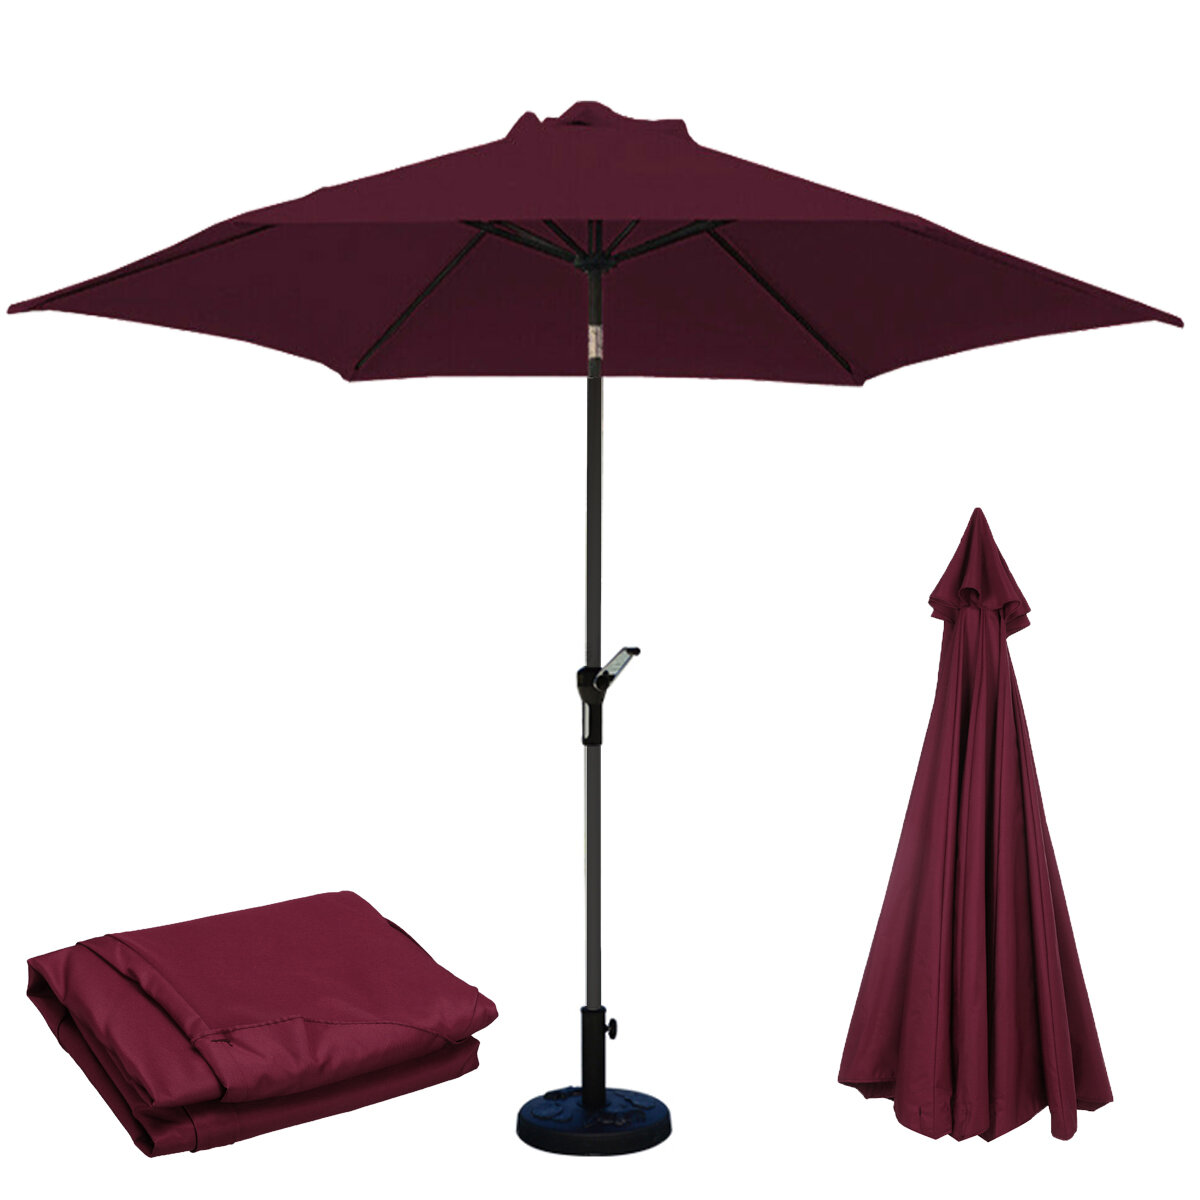 3m 6 Arm Parasol Canopy Cover Waterproof Awning Sun Shade Shelter Replacement Cloth Outdoor Garden Patio